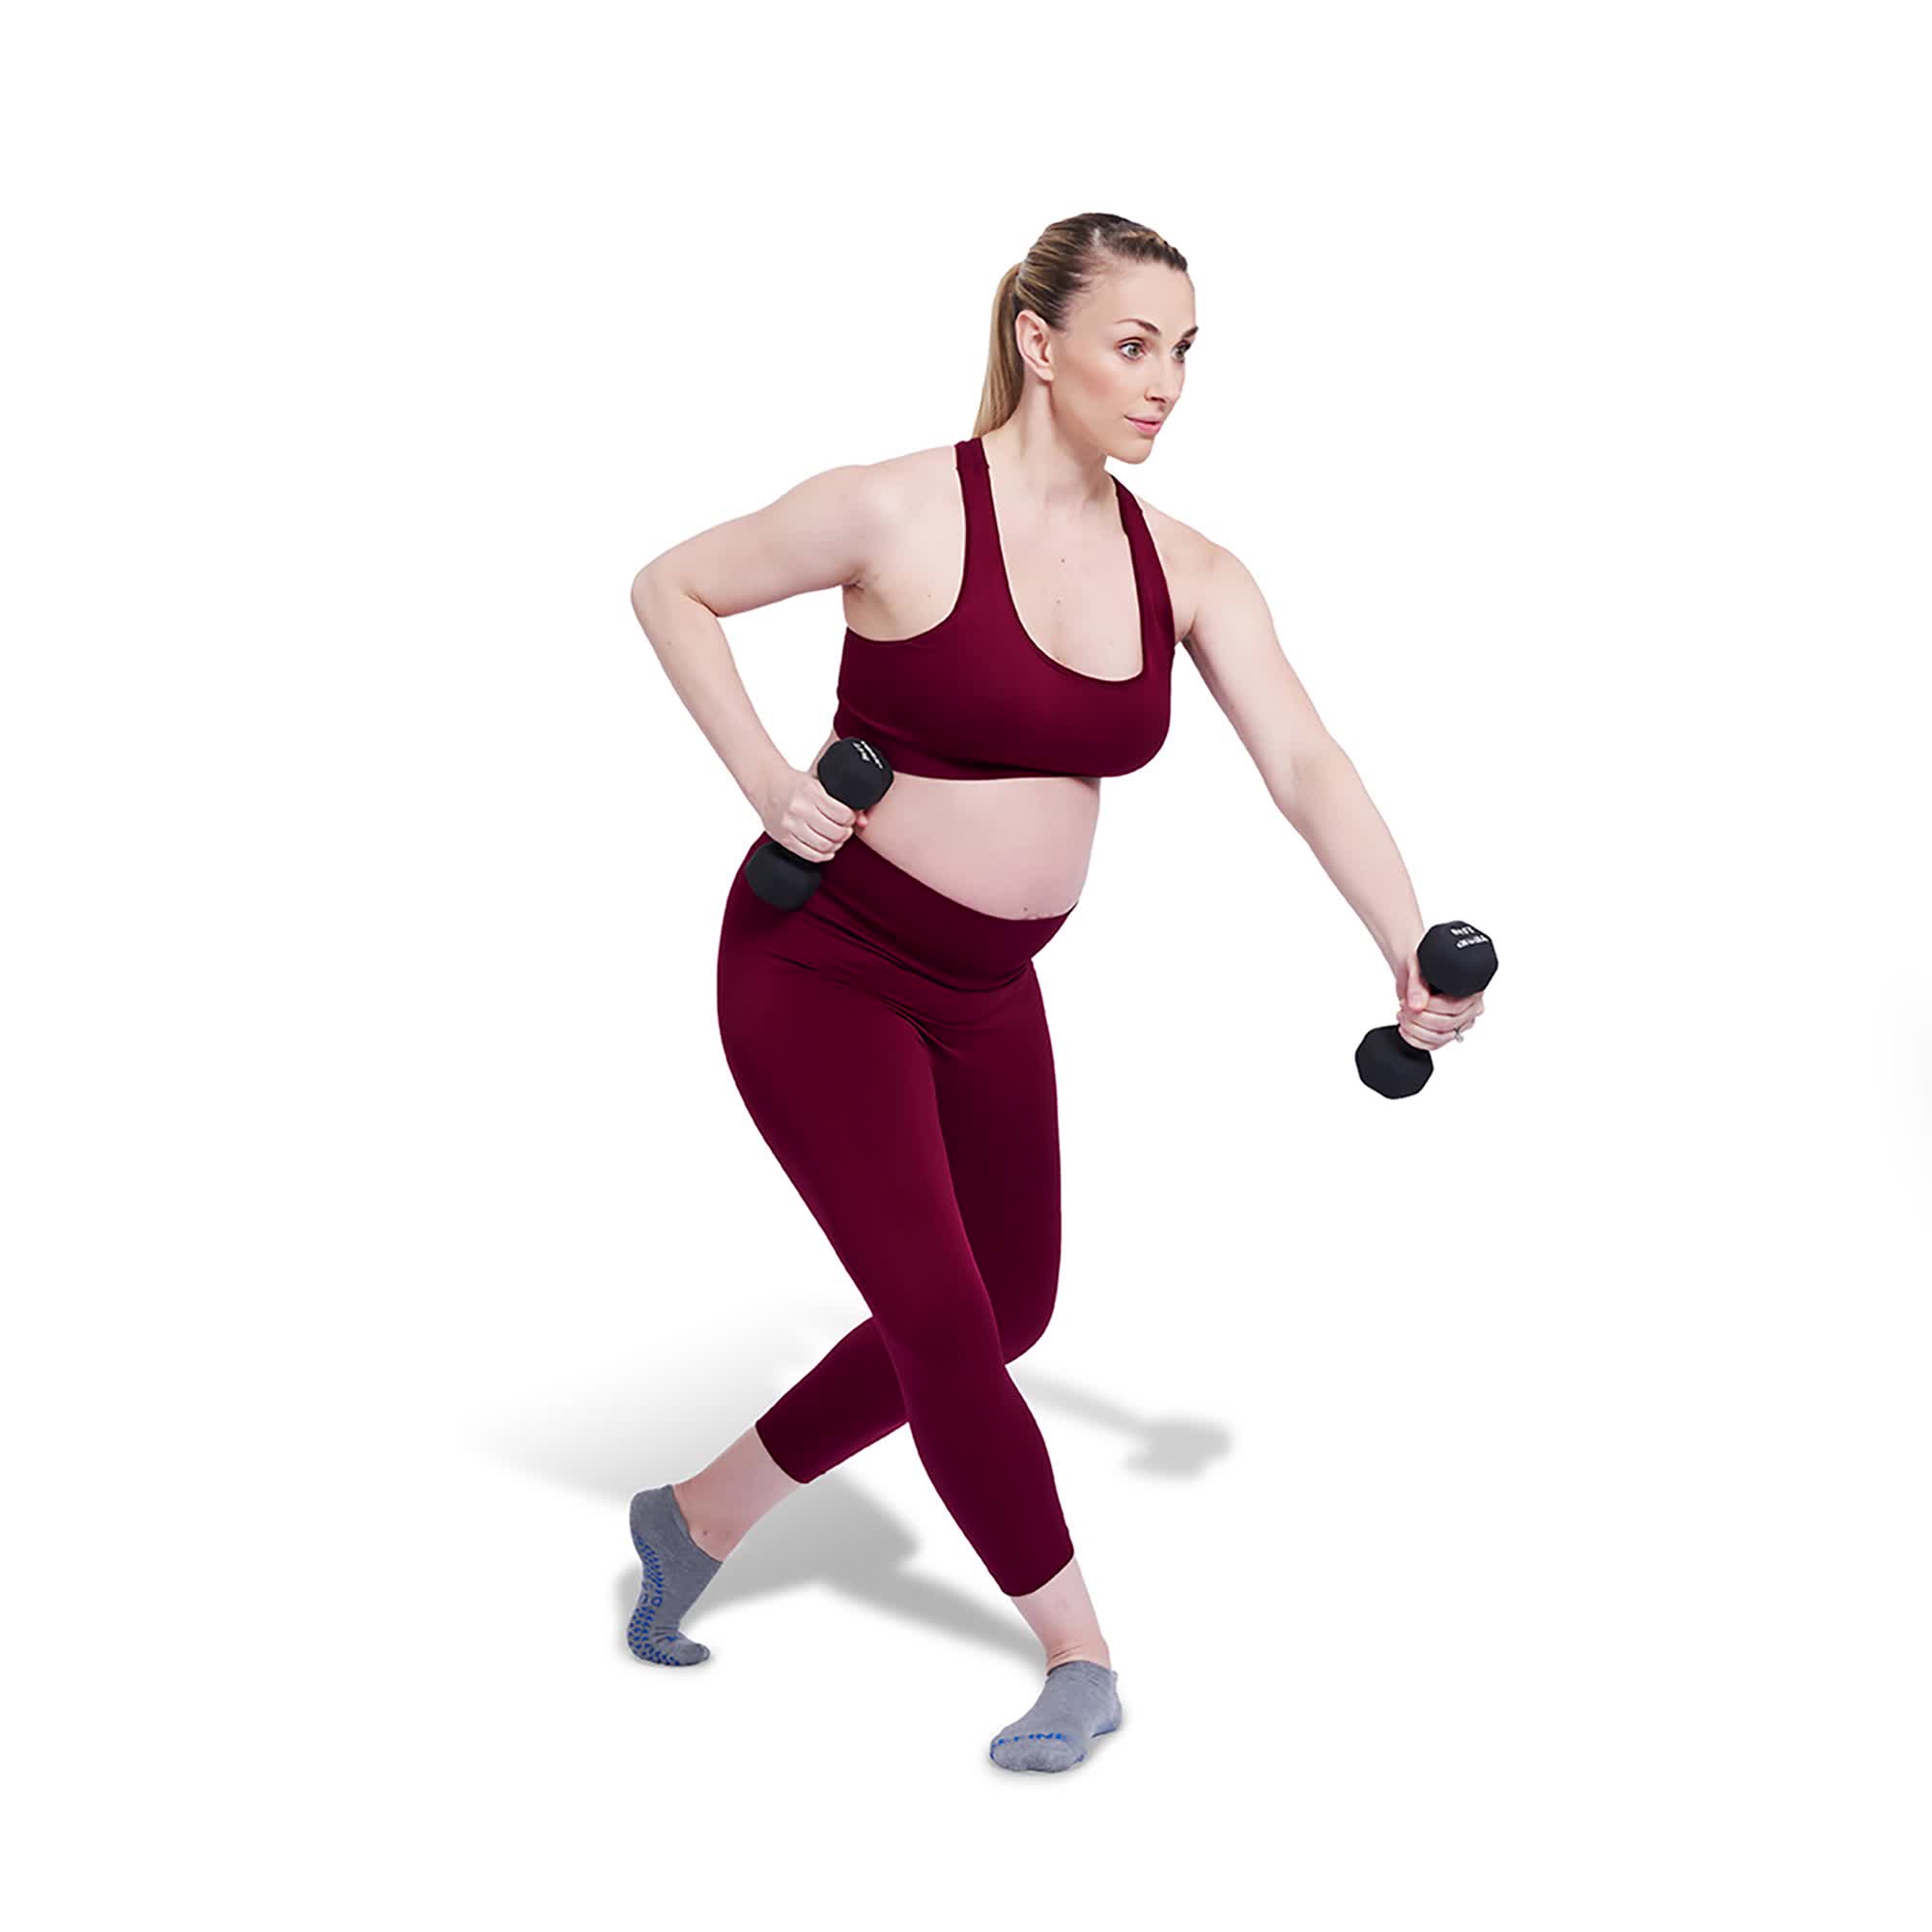 Pregnancy exercises: 9 strength moves + 5 forms of cardio